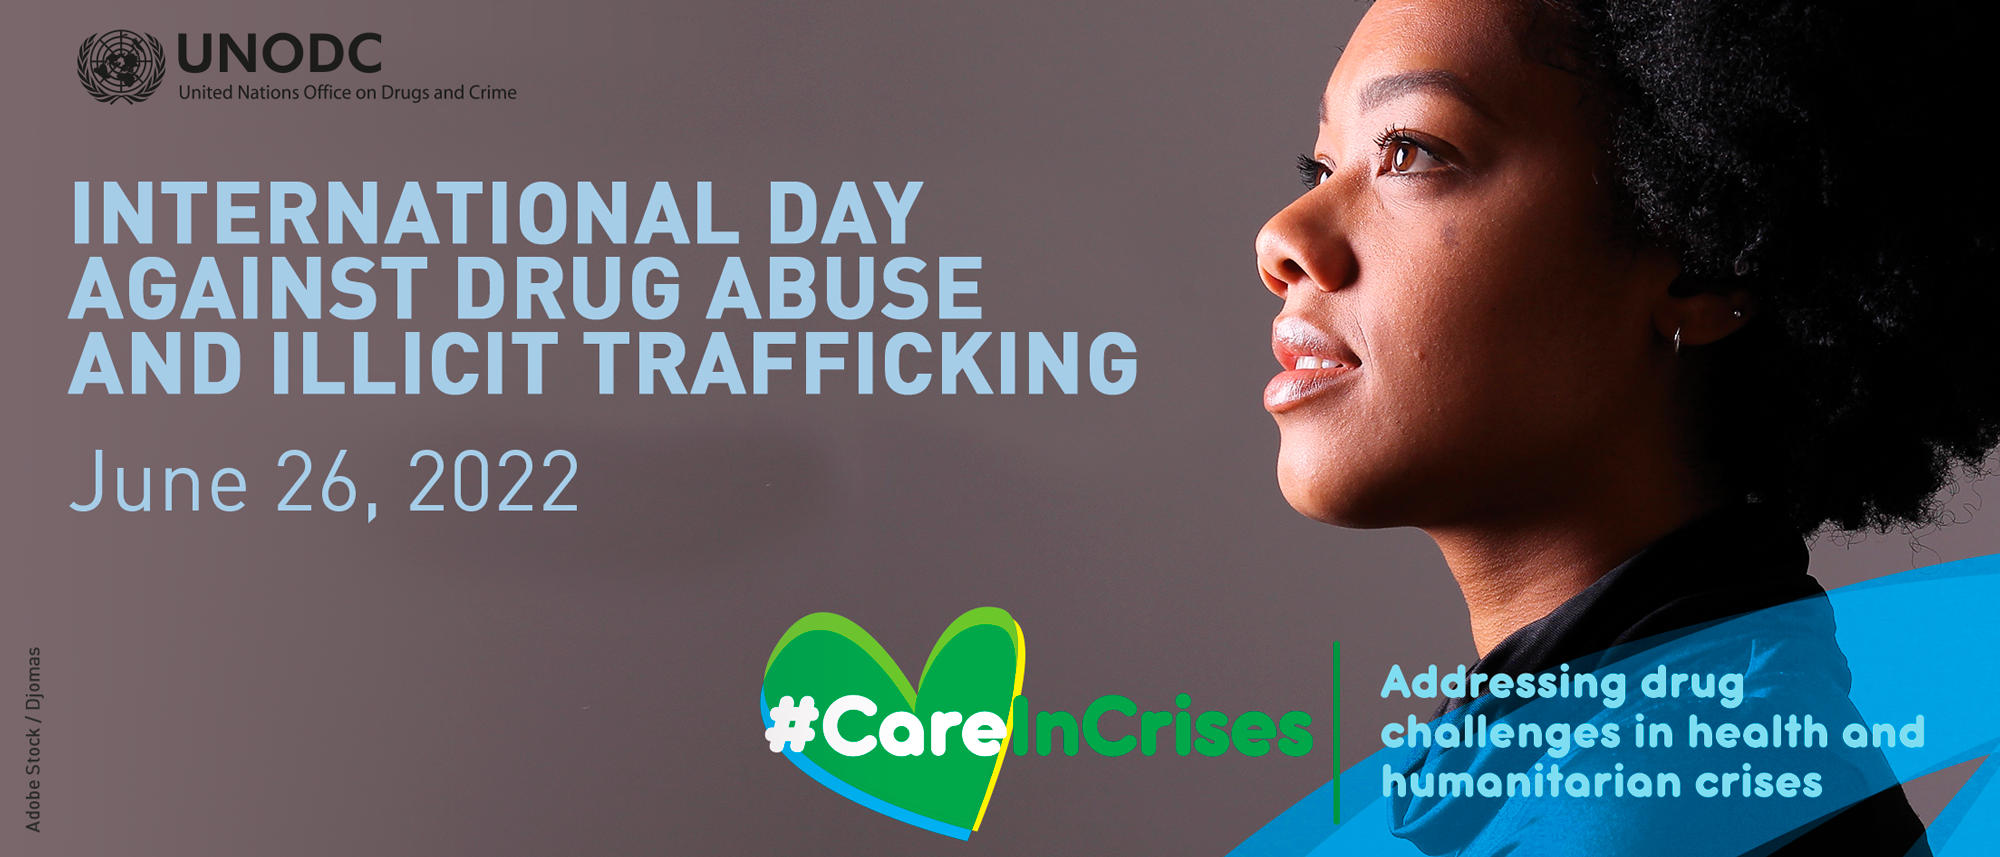 International Day against Drug Abuse and Illicit Trafficking 2022_50.1